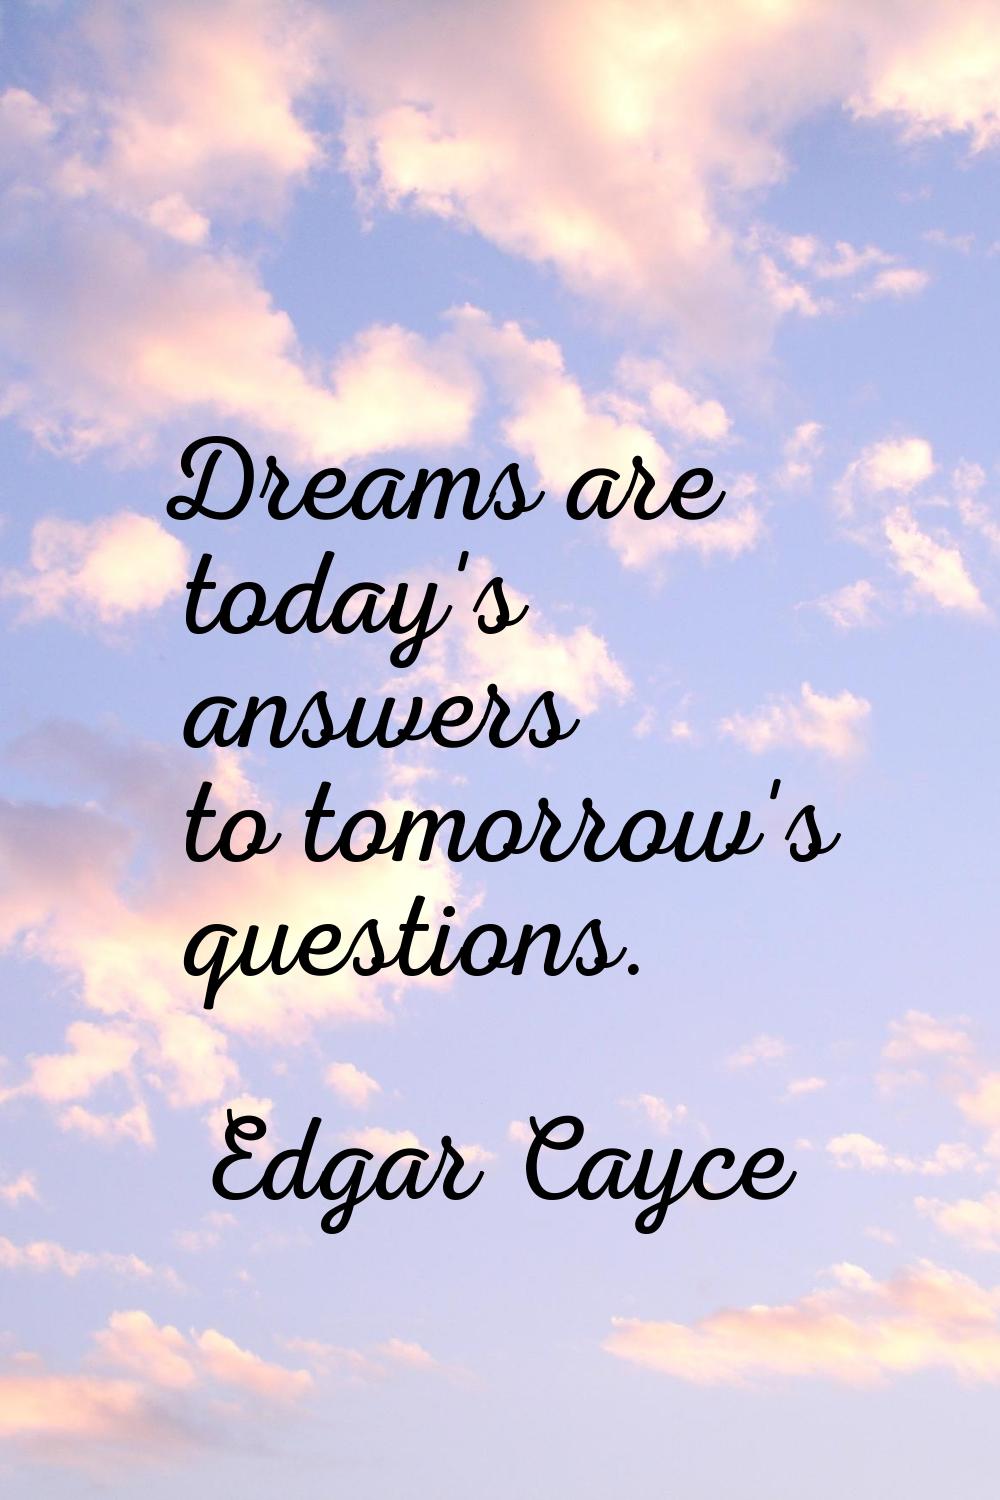 Dreams are today's answers to tomorrow's questions.